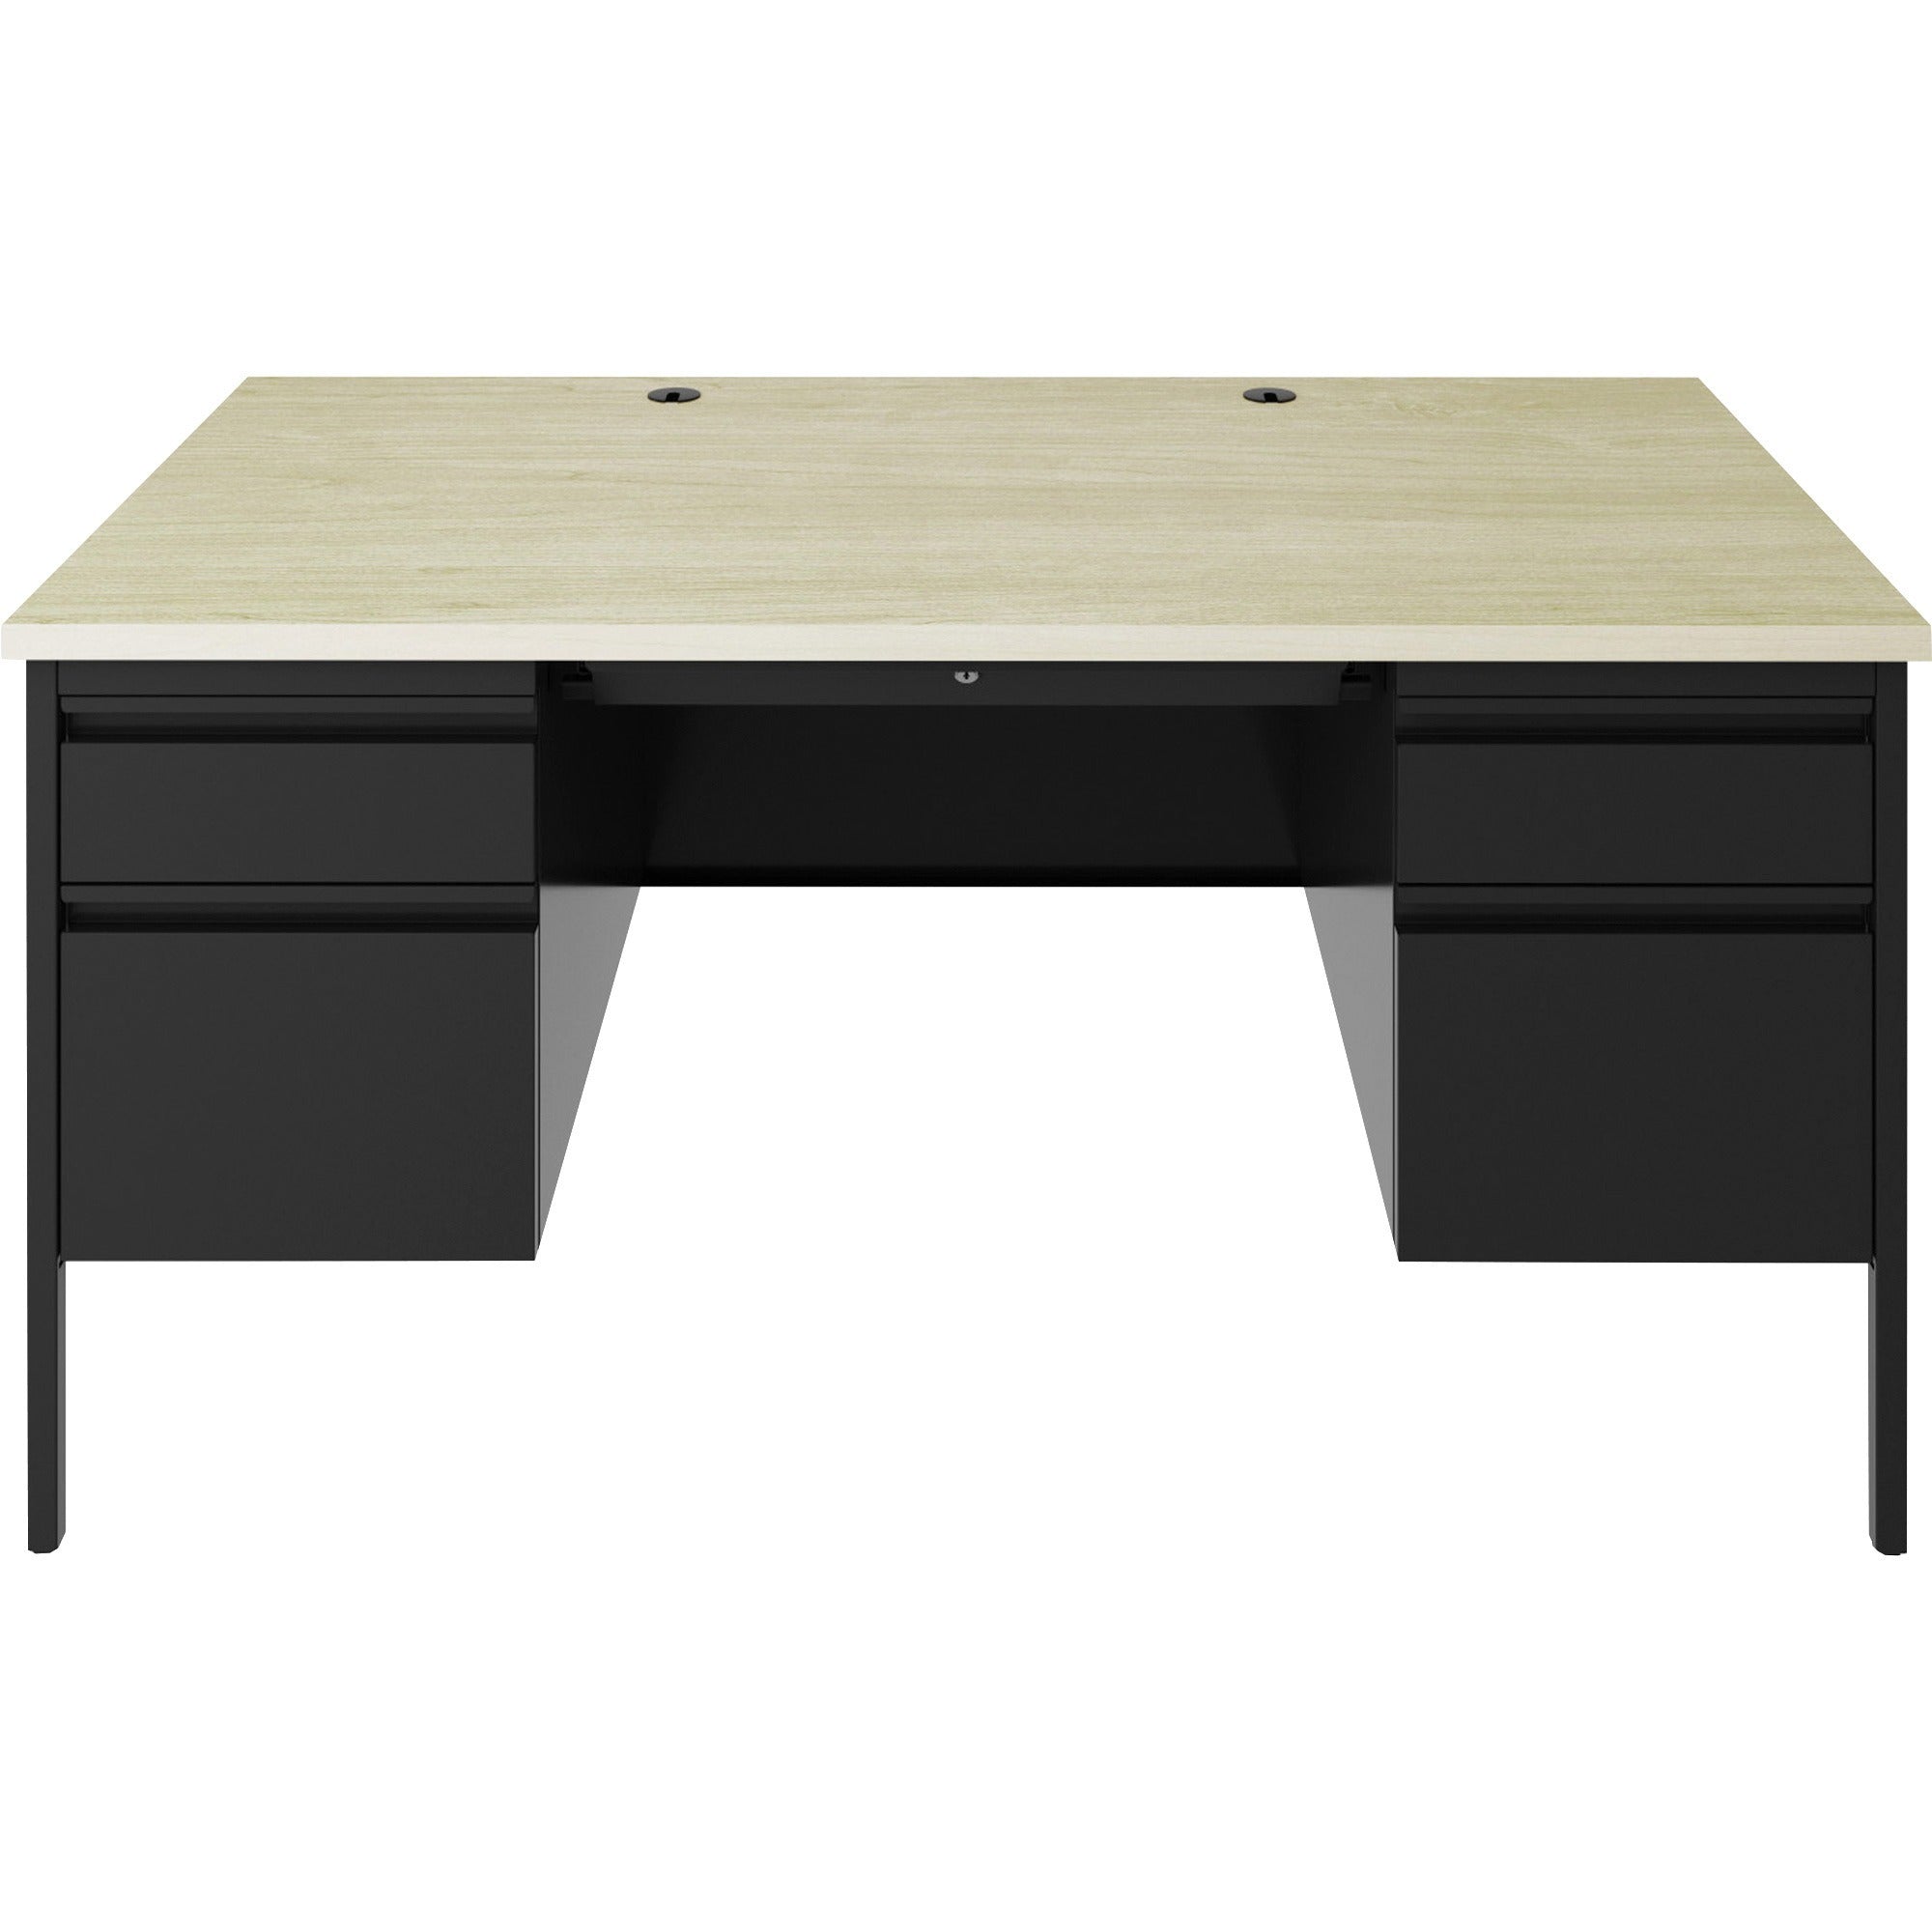 lorell-fortress-series-double-pedestal-desk-60-x-29530--11-top-08-modesty-panel-file-drawers-double-pedestal-square-edge-material-steel-finish-black_llr60930 - 3